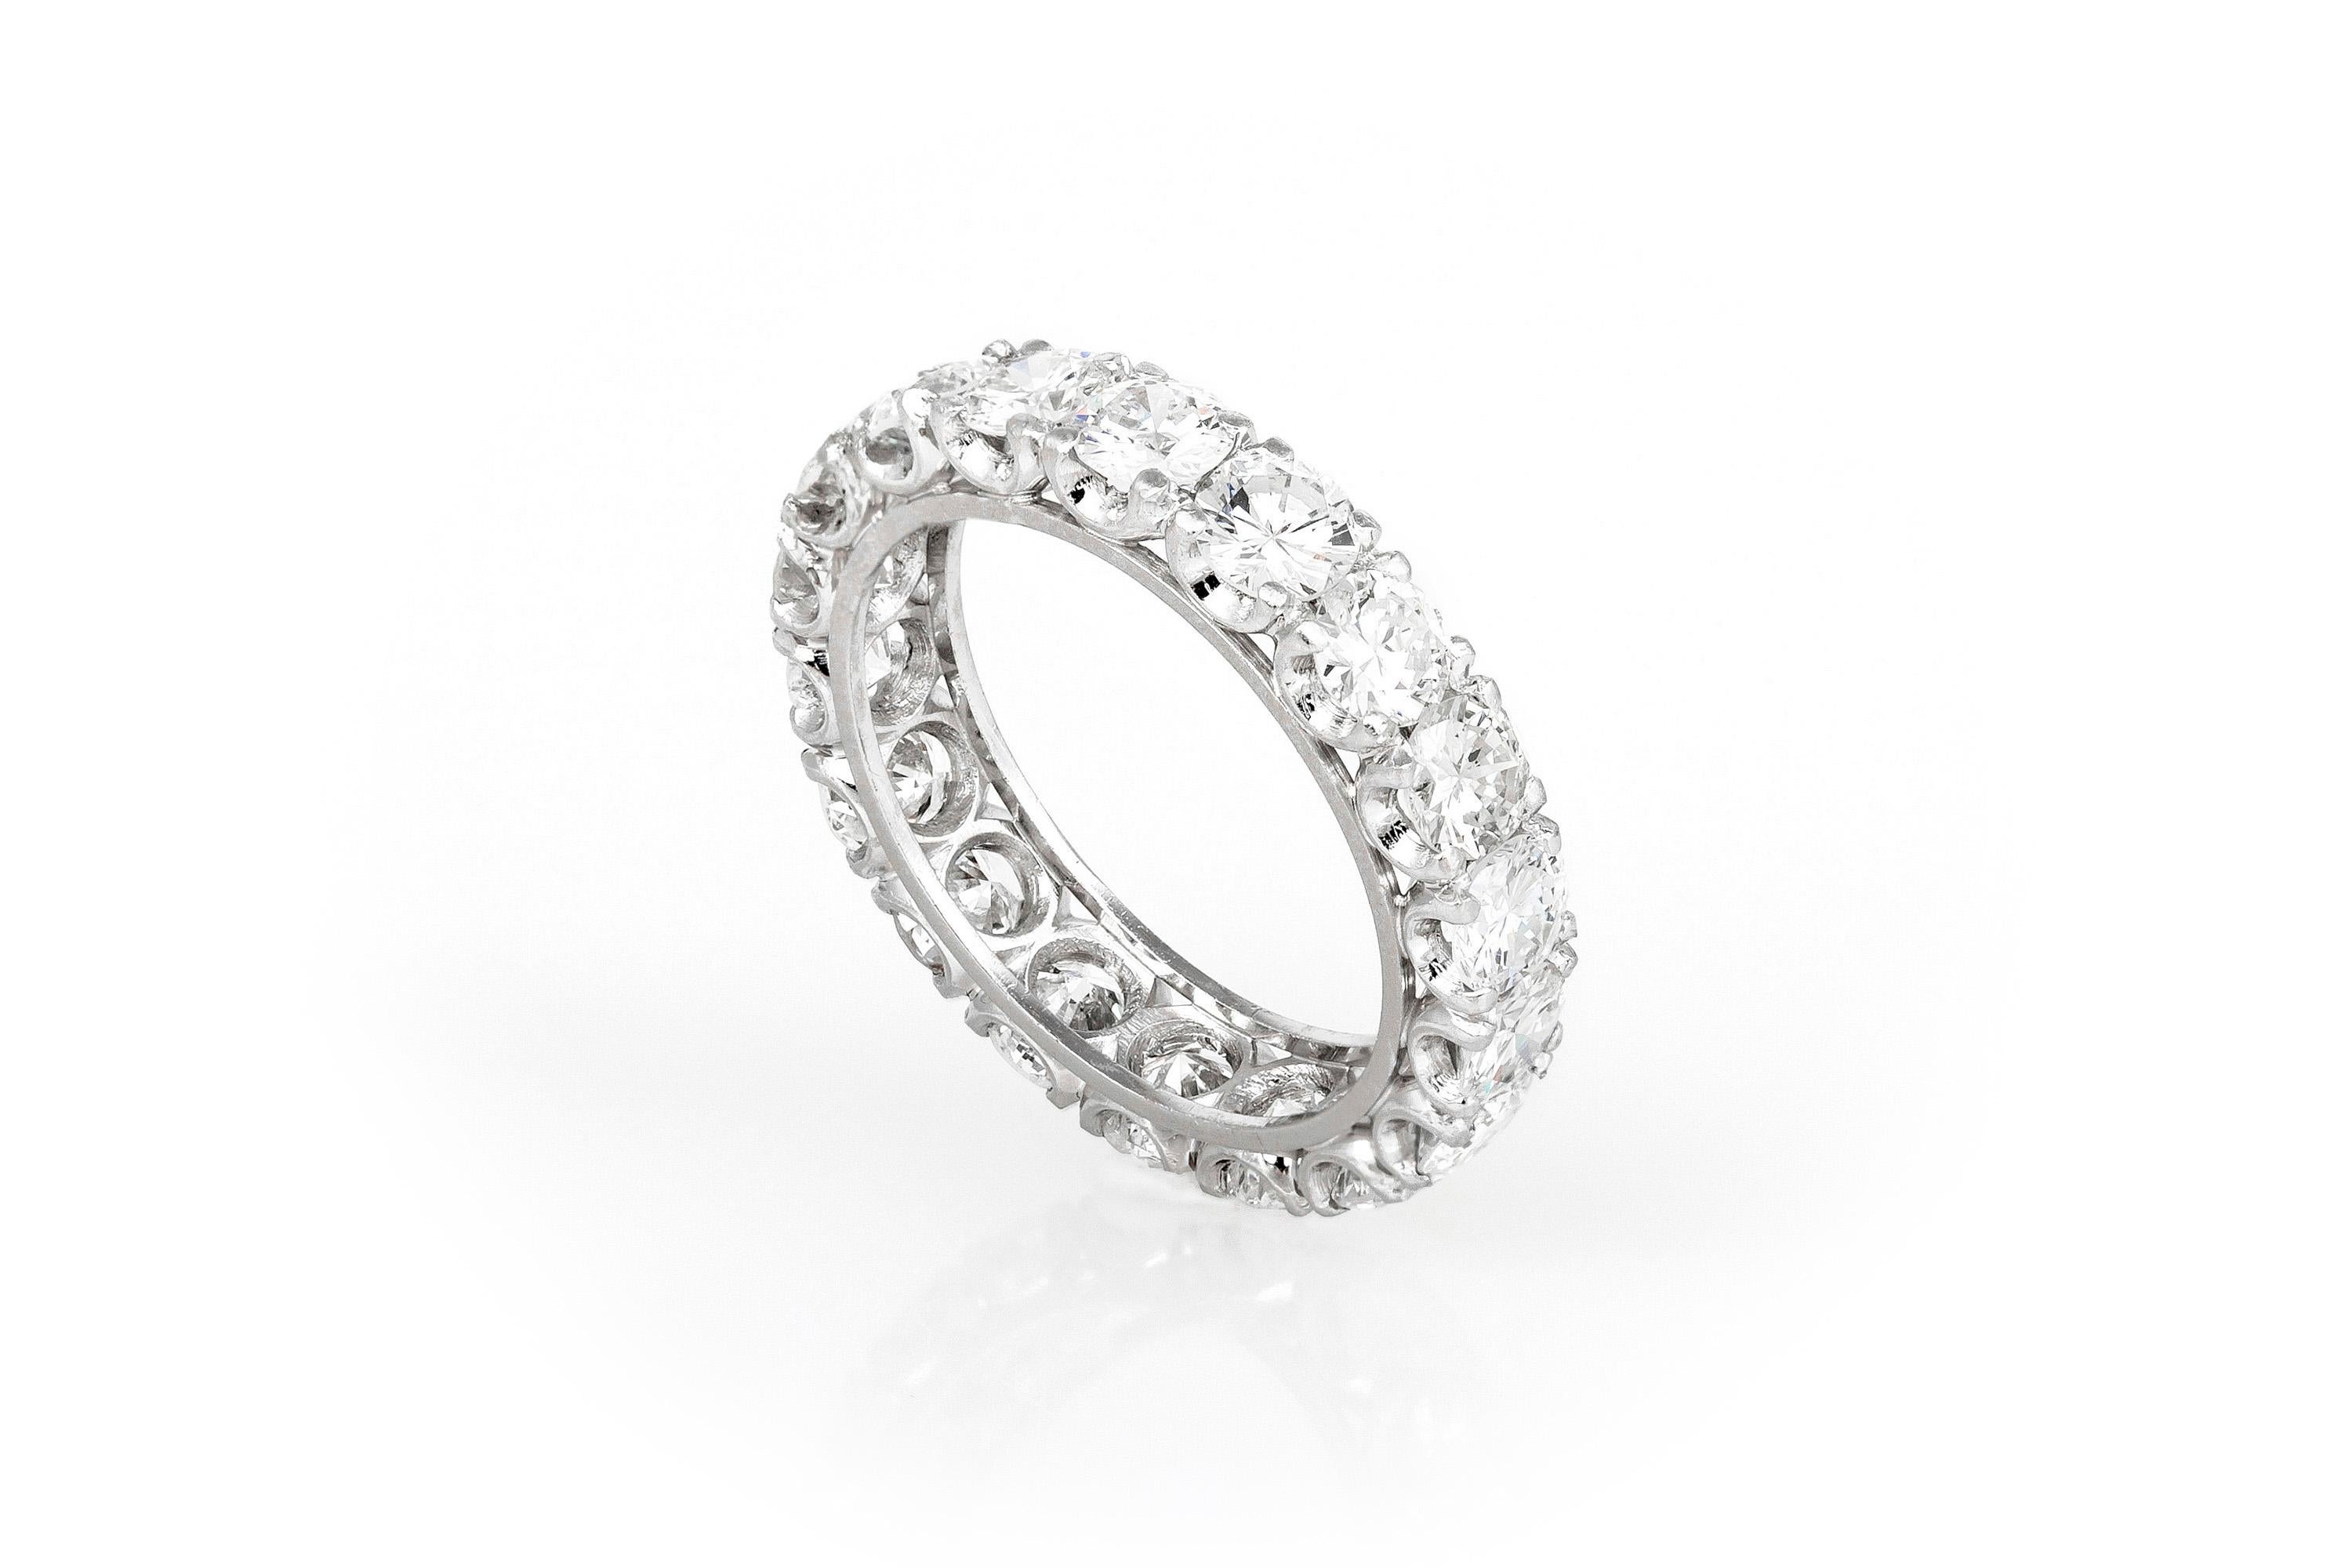 The beautiful ring is crafted in platinum with 6.20 carats of round cut diamonds.
irca 1940.